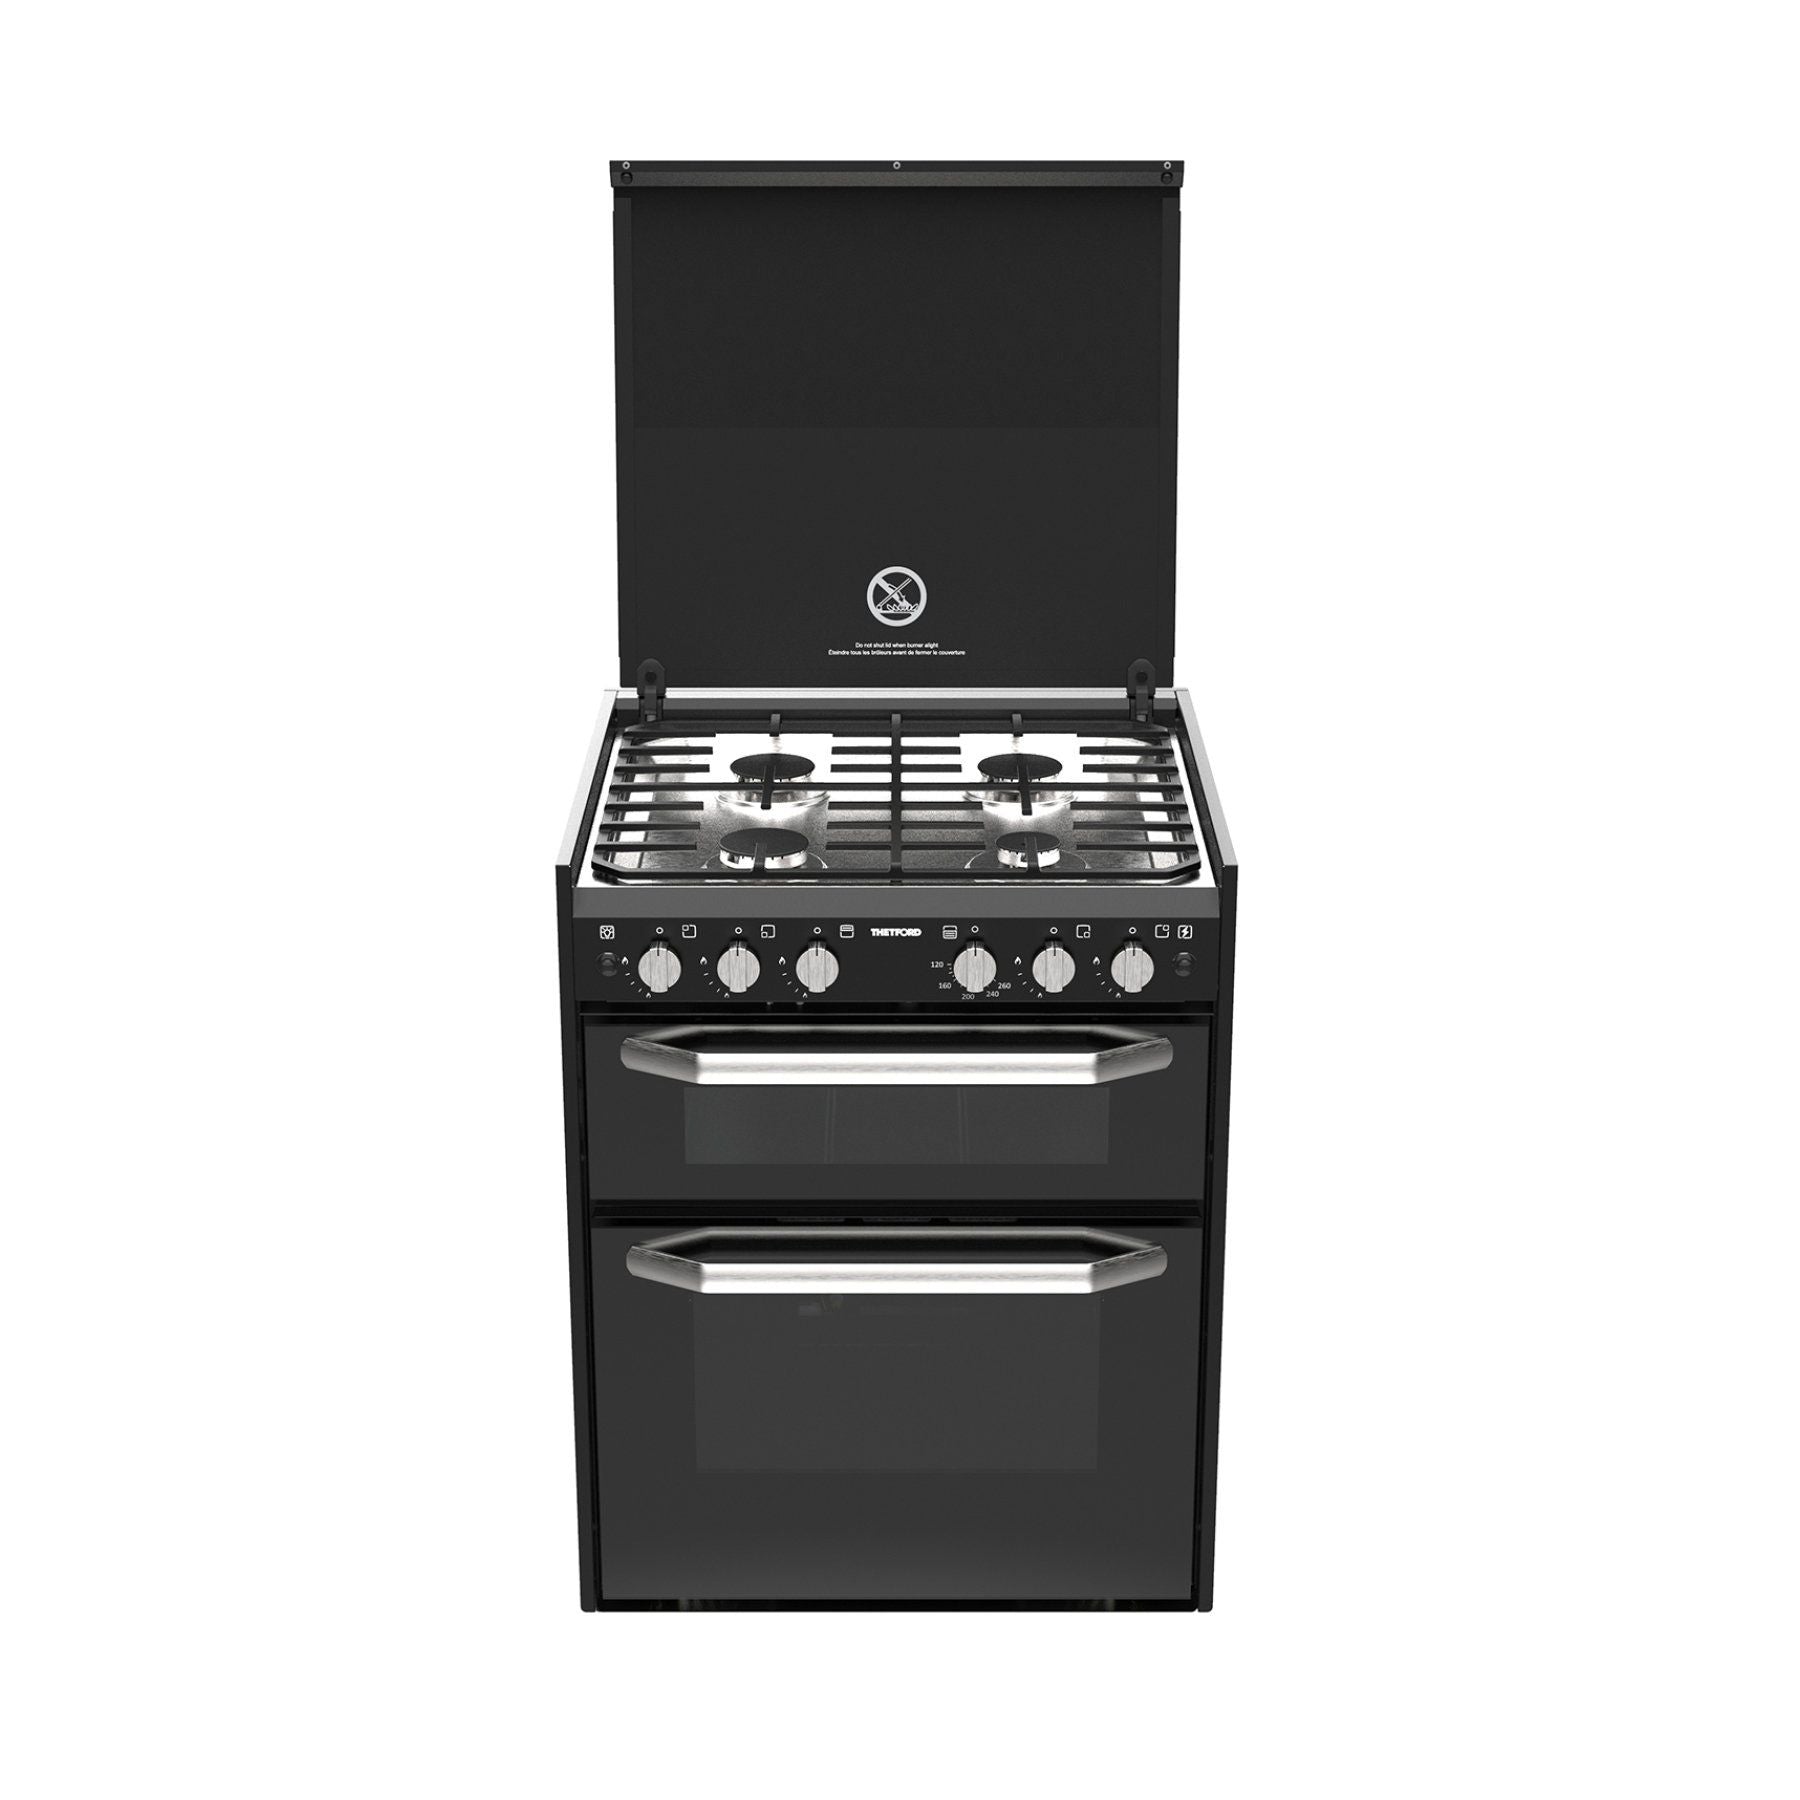 Cooktops Grills and Ovens